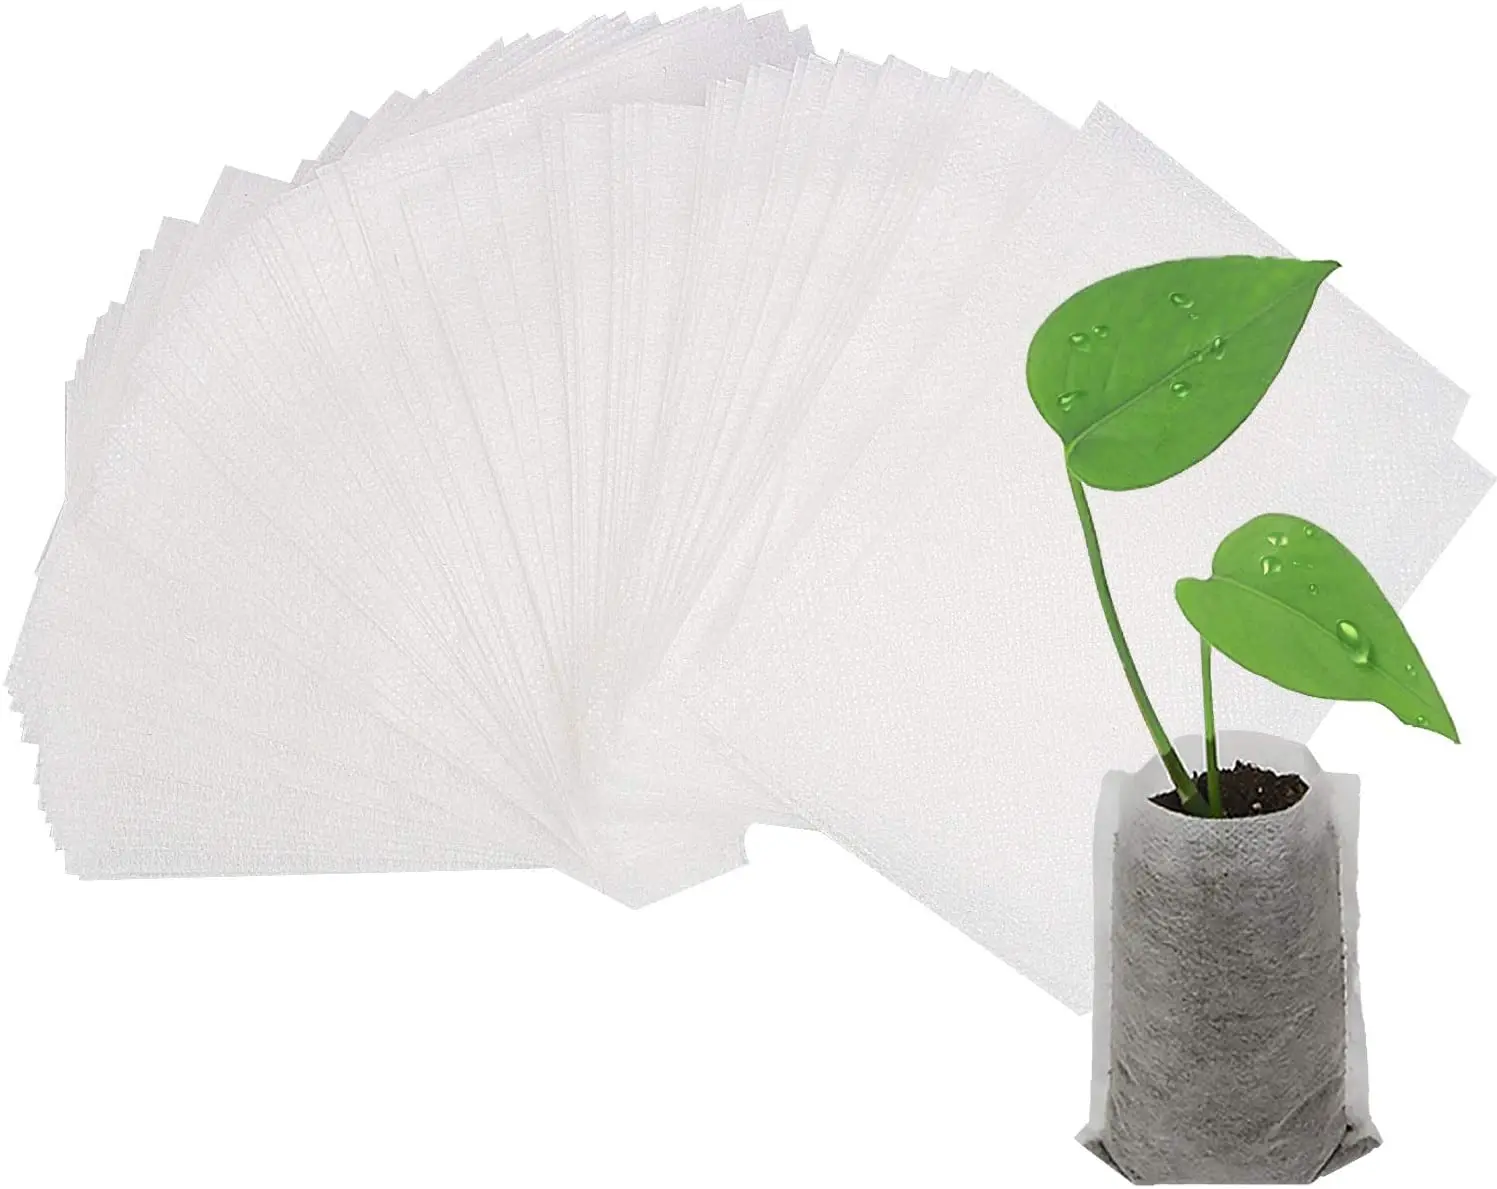 Garden Nursery Seedling Plant Grow Bags Biodegradable Seed Starter Bags Fabric Seedling Pots Plants Pouch Home Garden Supply Develoo 400PCS Non-Woven Nursery Bags 